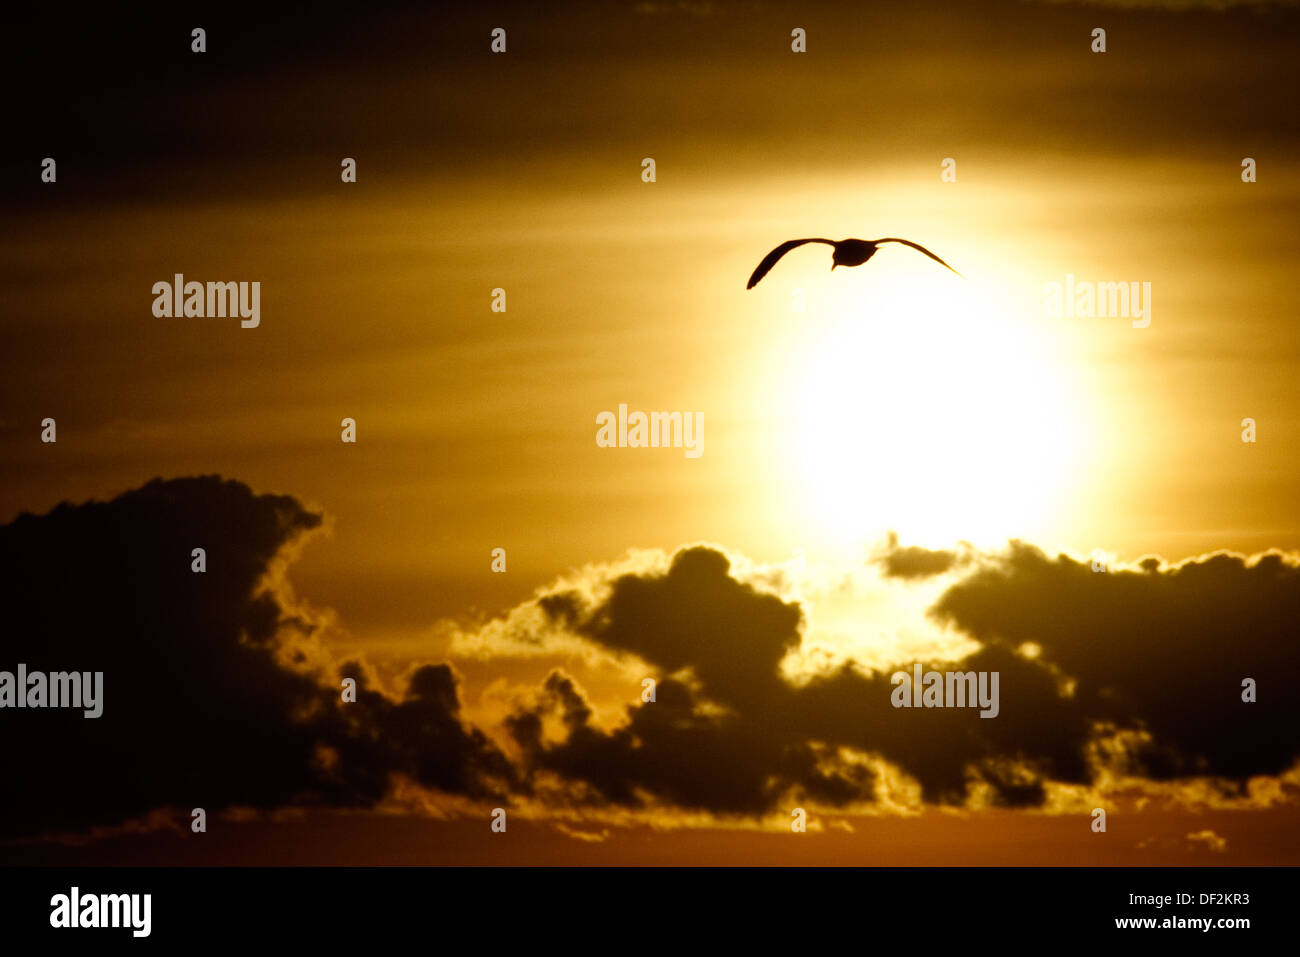 Silhouette Of A Bird Flying In Sky Stock Photo